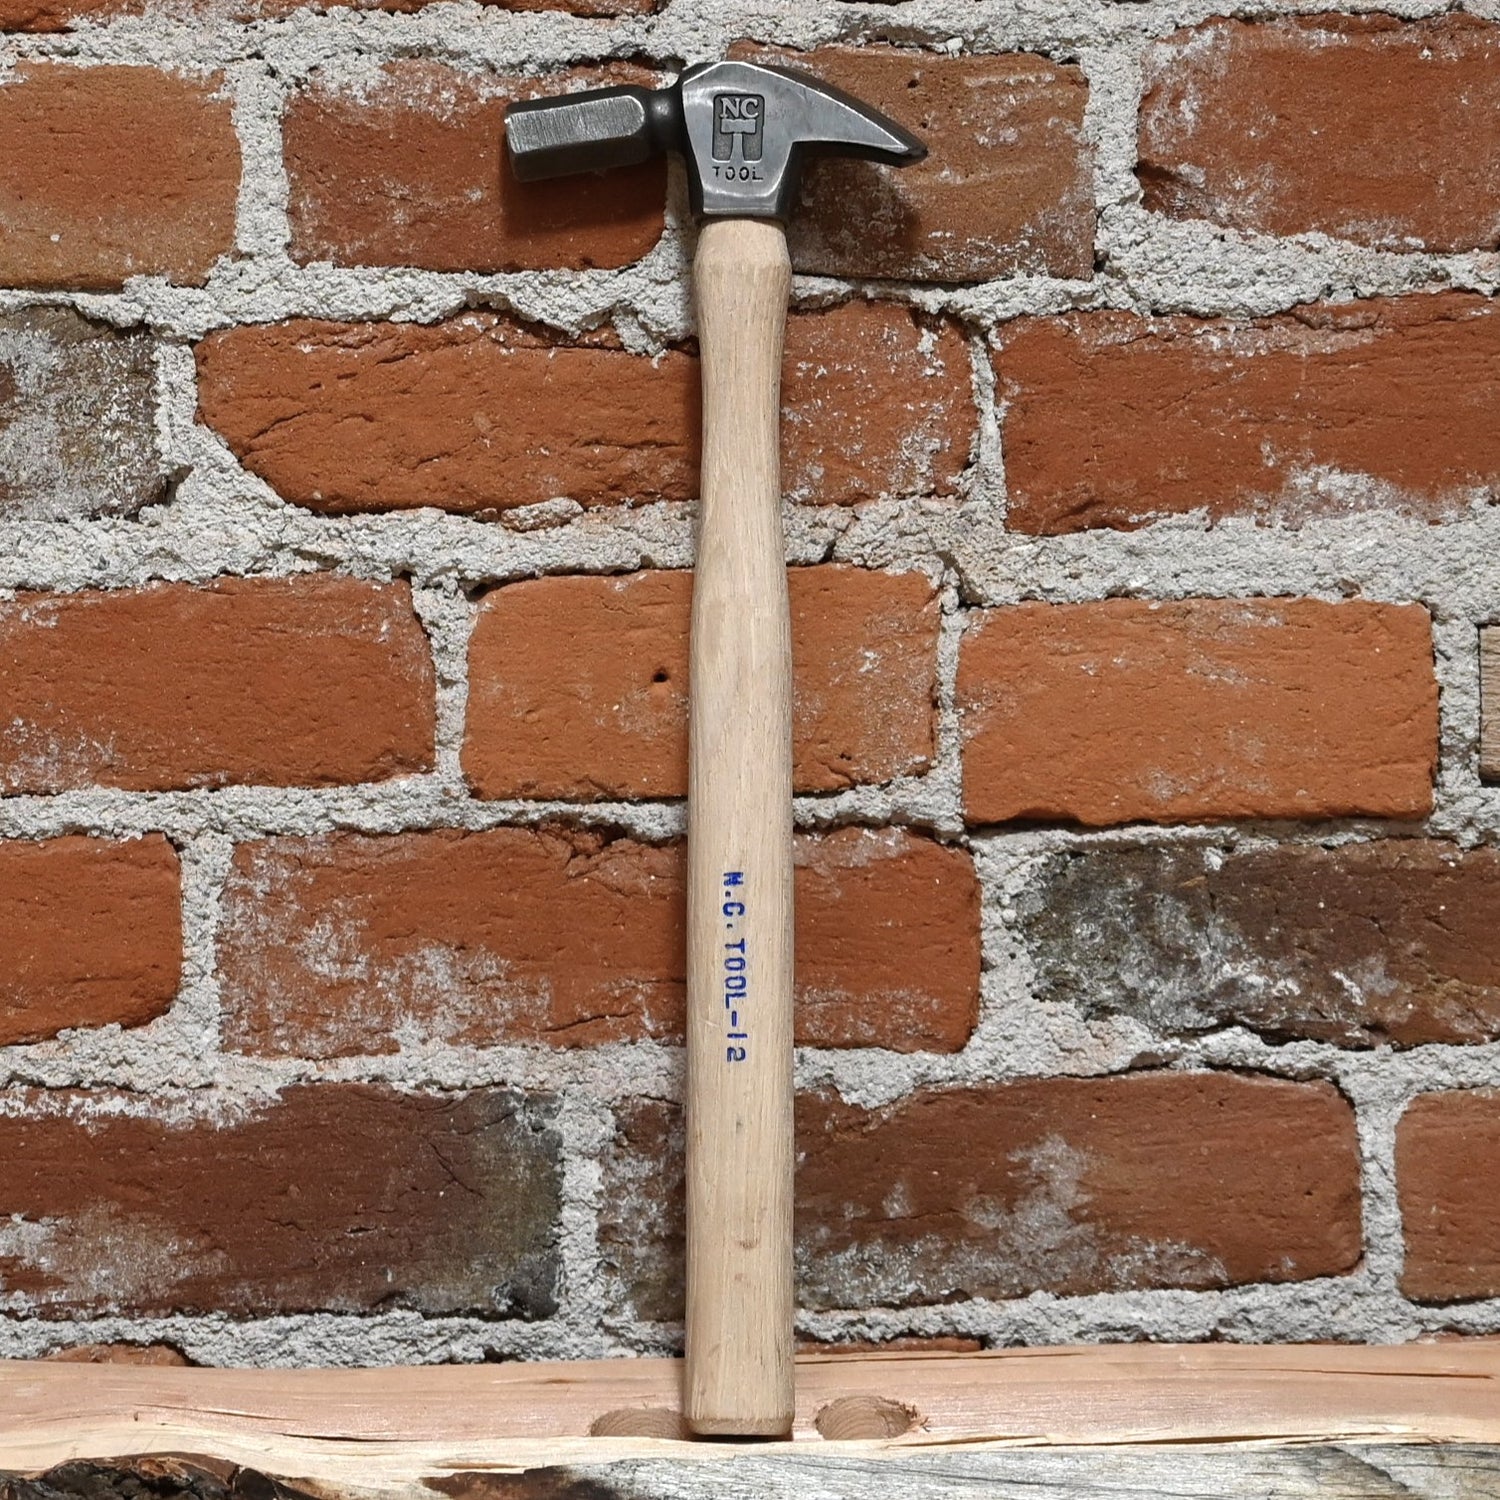 12 Oz Cavalry Driving Hammer view of hammer